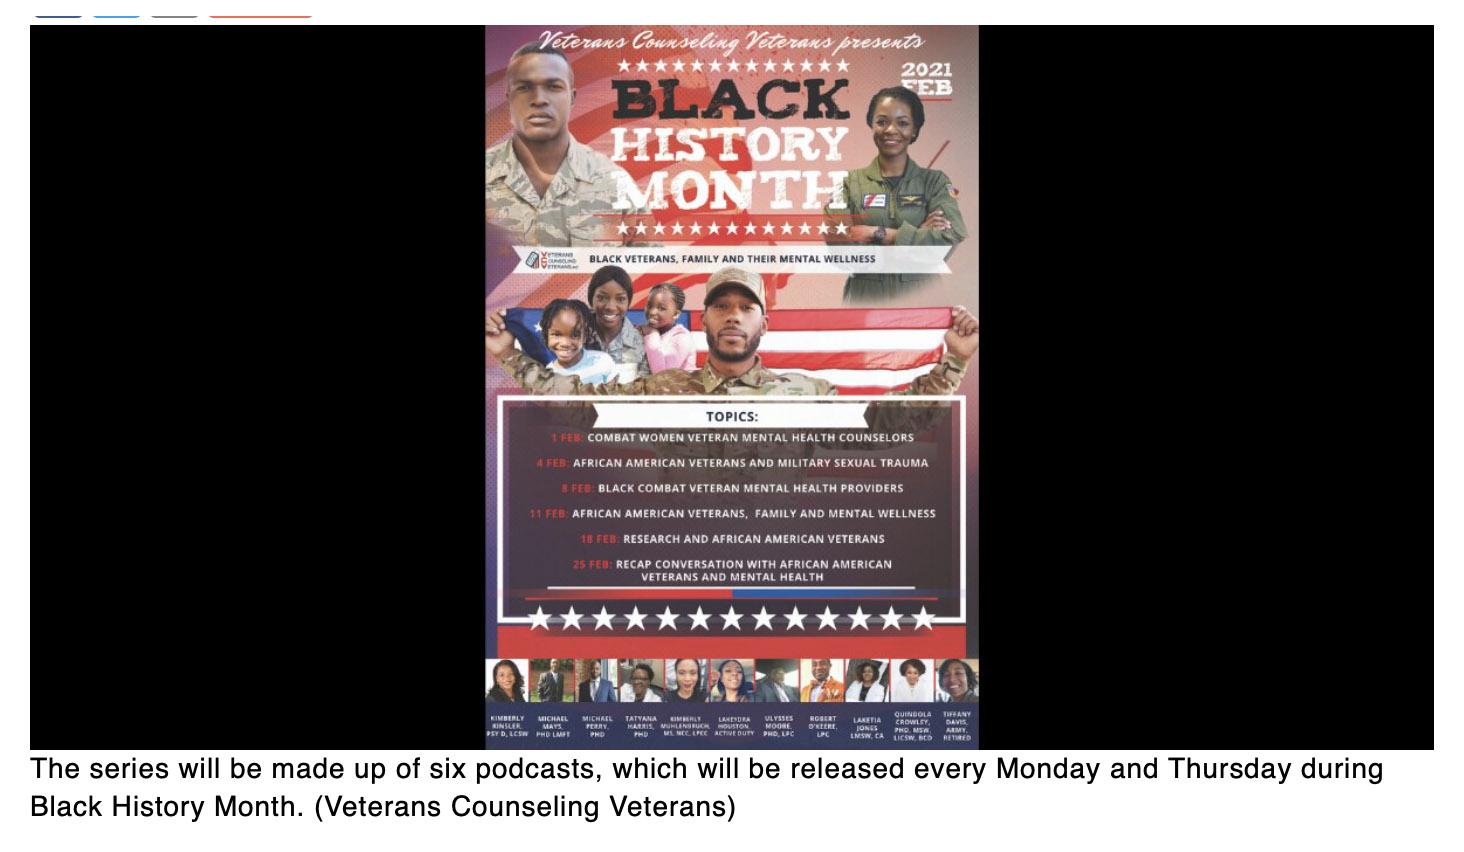  Veterans group launches podcast series for Black History Month on Black veterans and their mental health